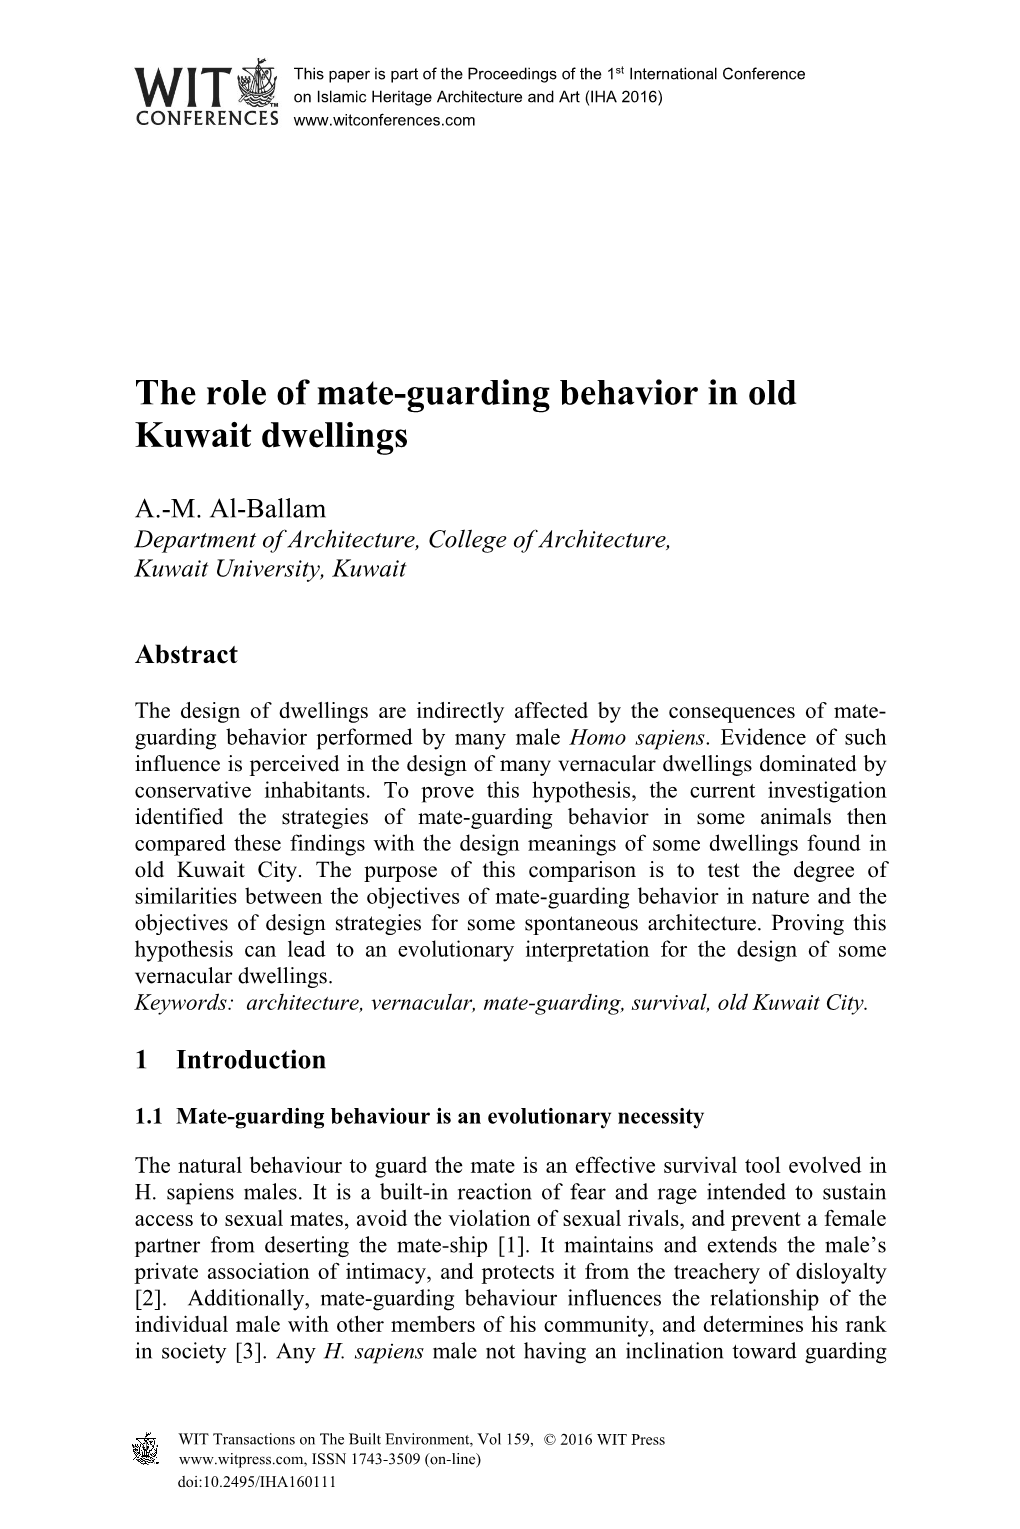 The Role of Mate-Guarding Behavior in Old Kuwait Dwellings